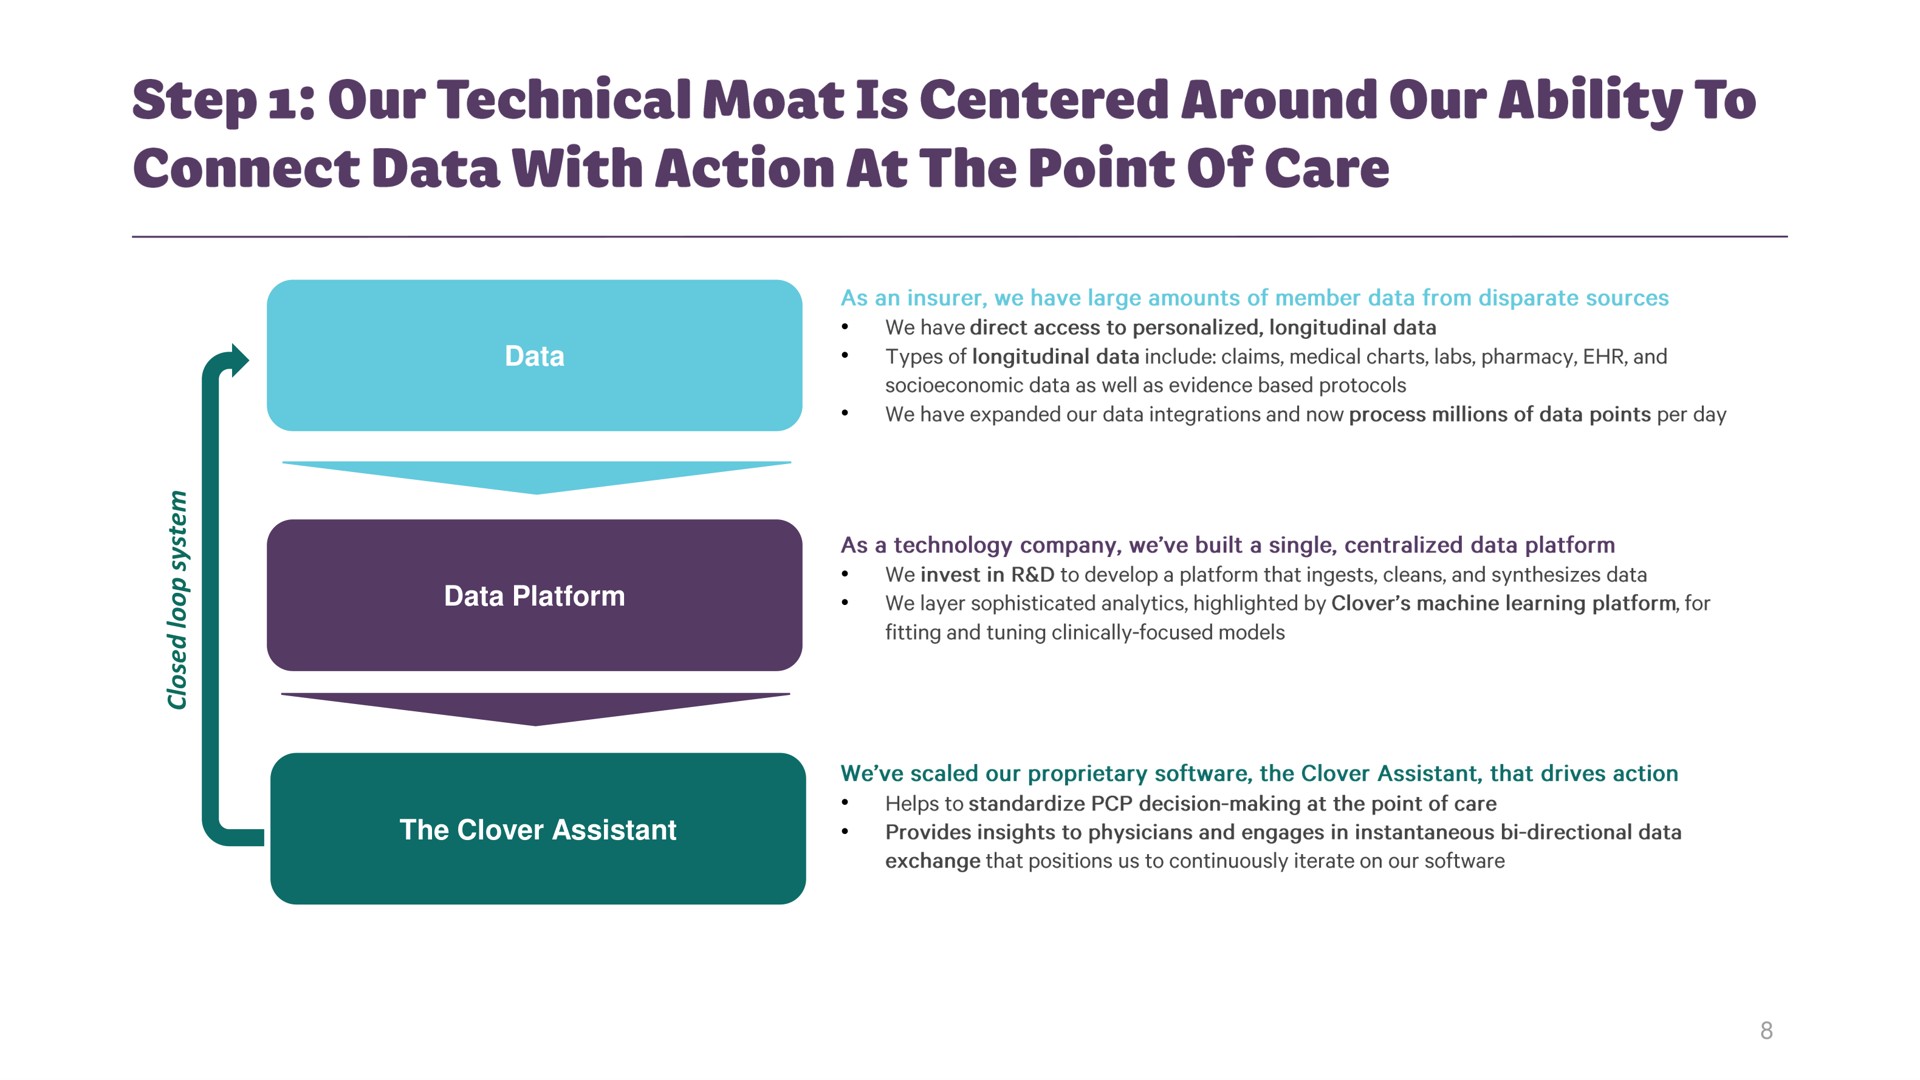 data data platform the clover assistant step our technical moat is centered around our ability to connect with action at point of care | Clover Health